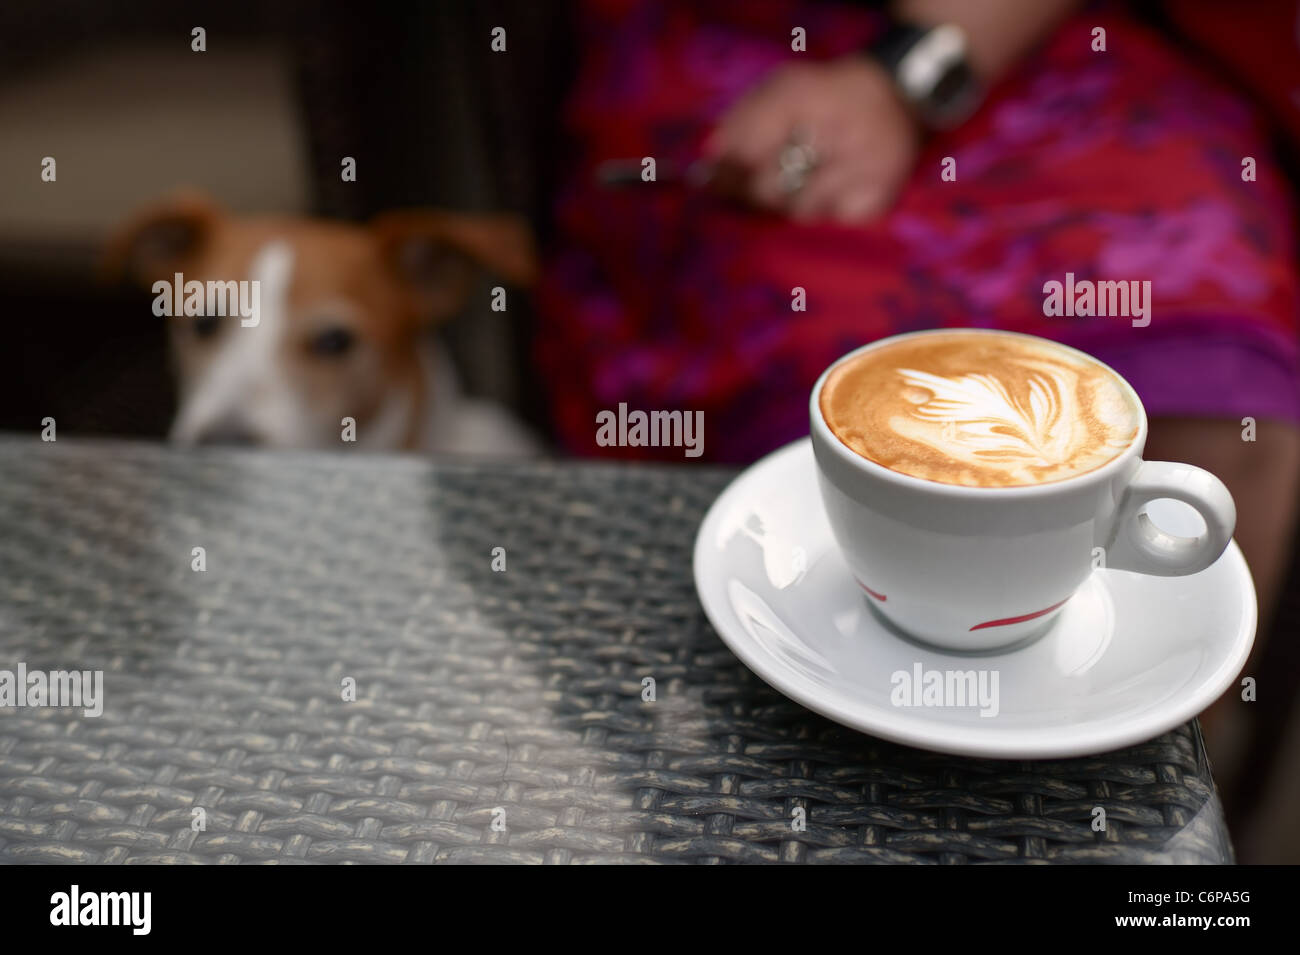 Decorative latte art, with a dog keeping an eye on the coffee cup Stock Photo